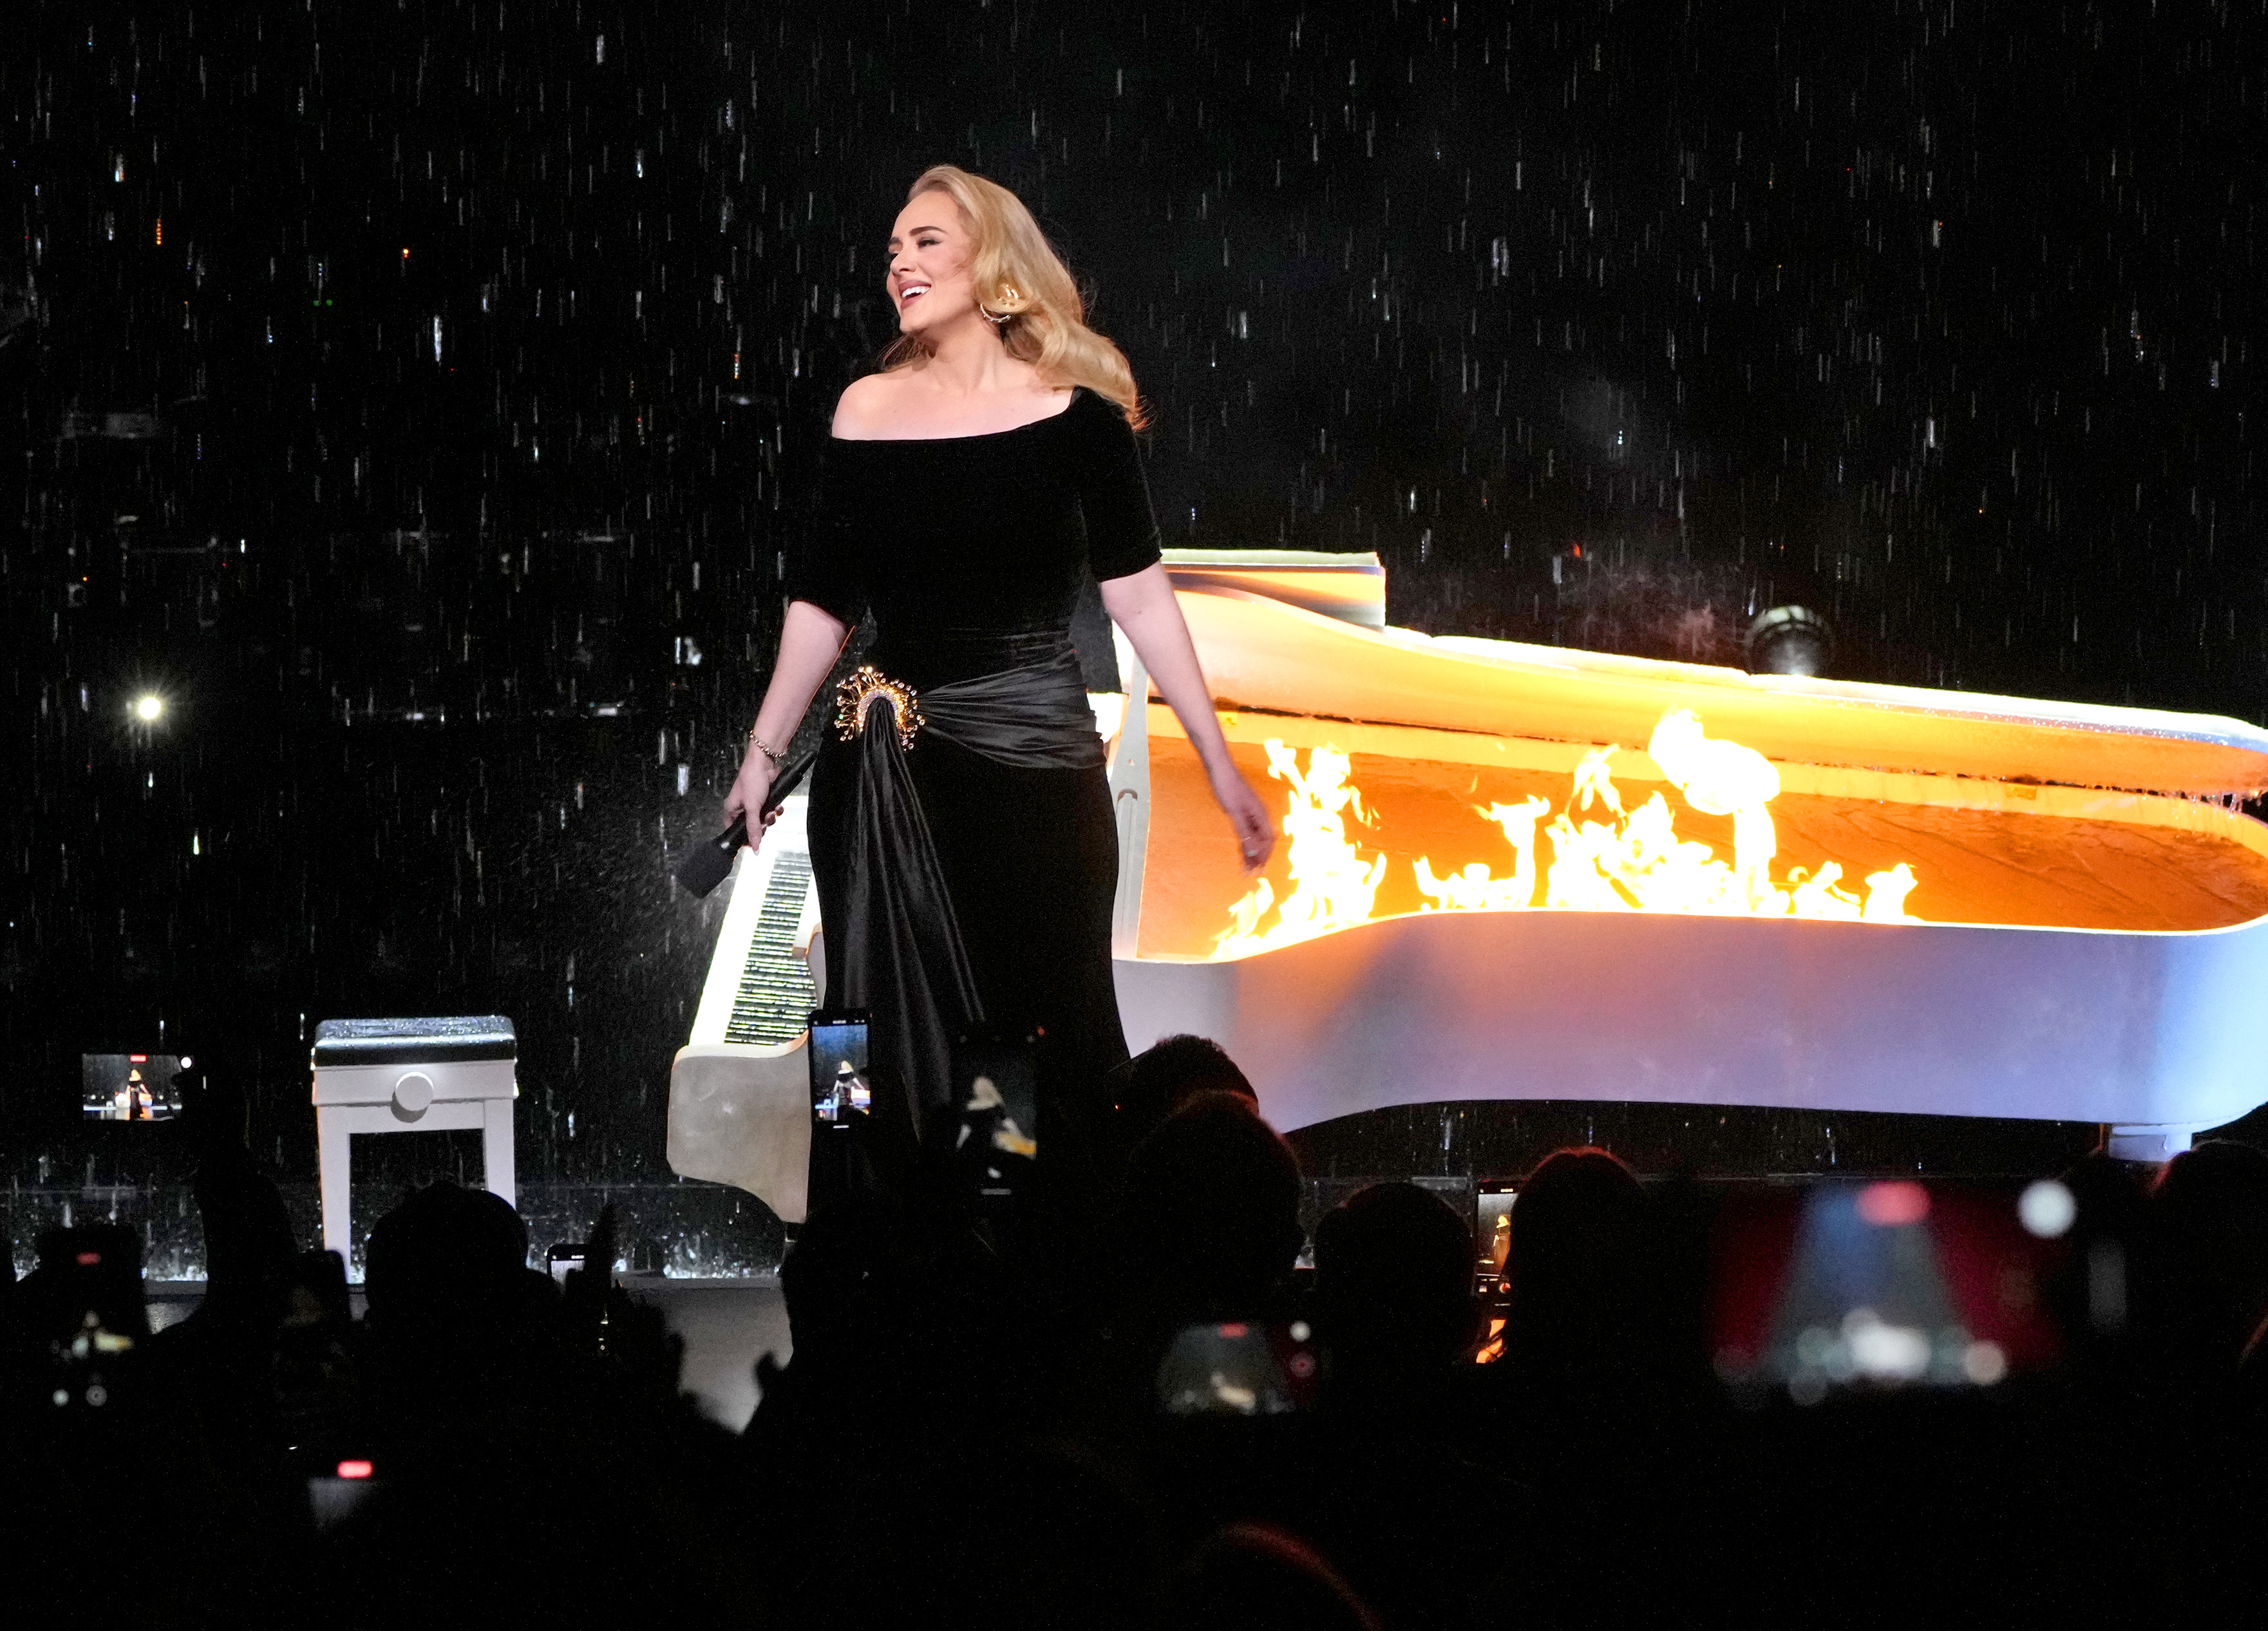 Adele onstage next to a piano